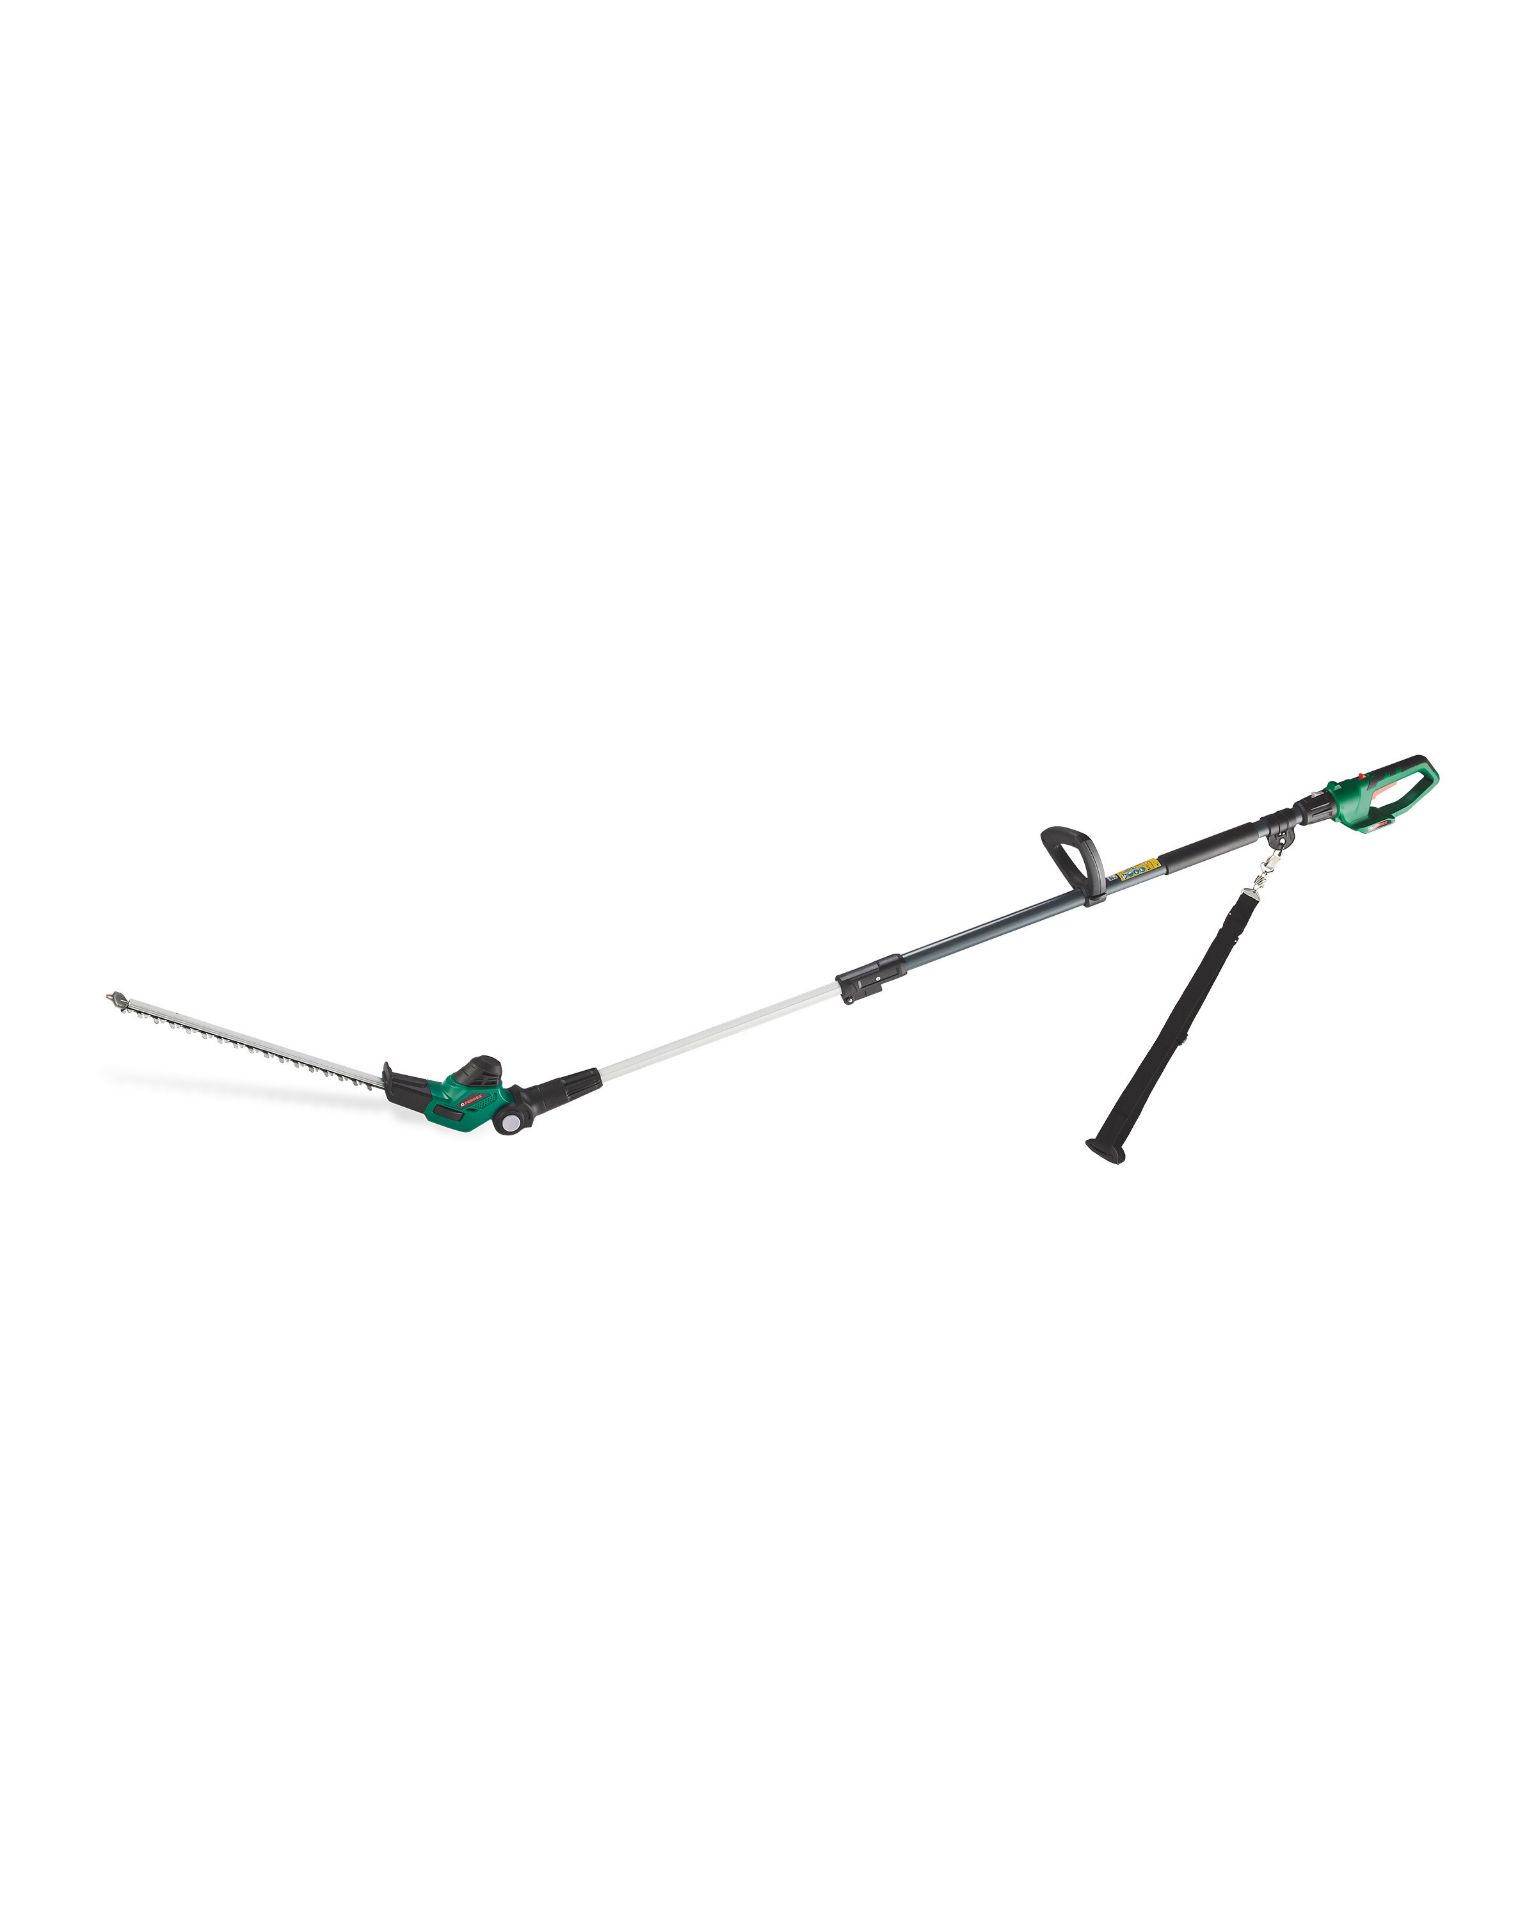 Boxed Ferrex 20V Lithium Iron Hedge Trimmer (Public Viewing and Appraisals Available)